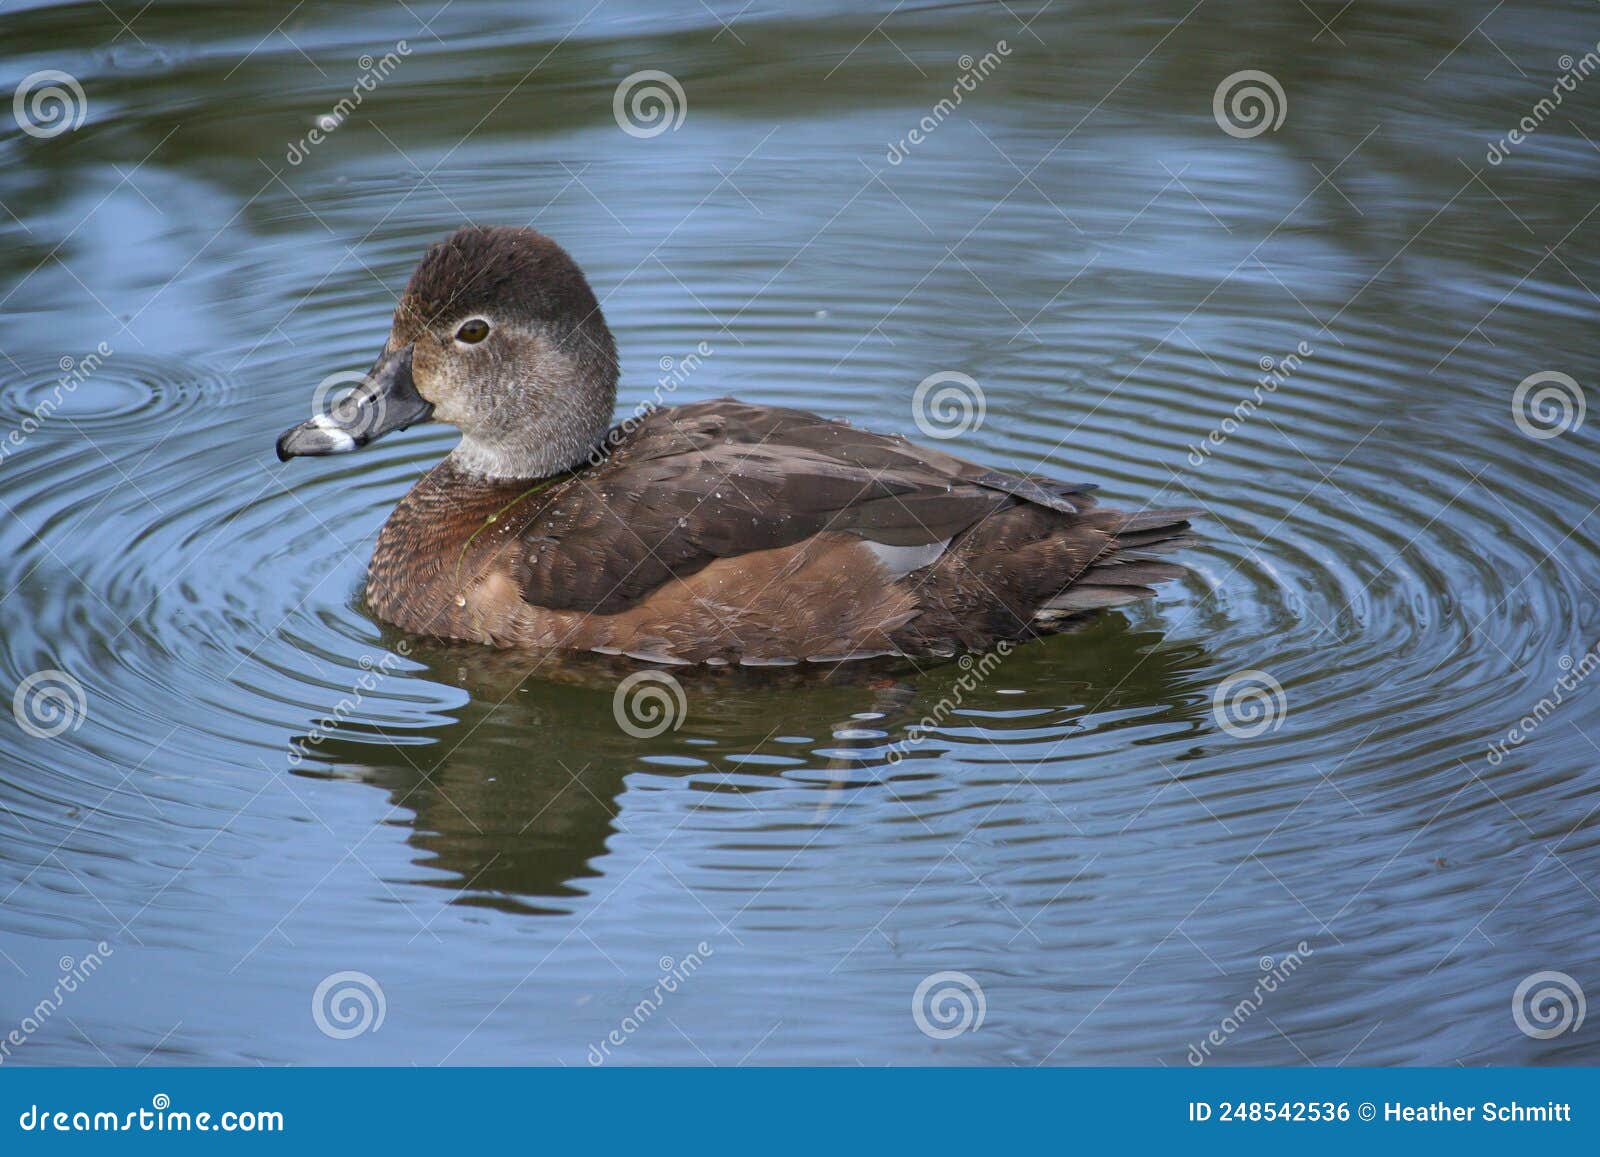 Ring Necked Duck in Close Up Photography · Free Stock Photo